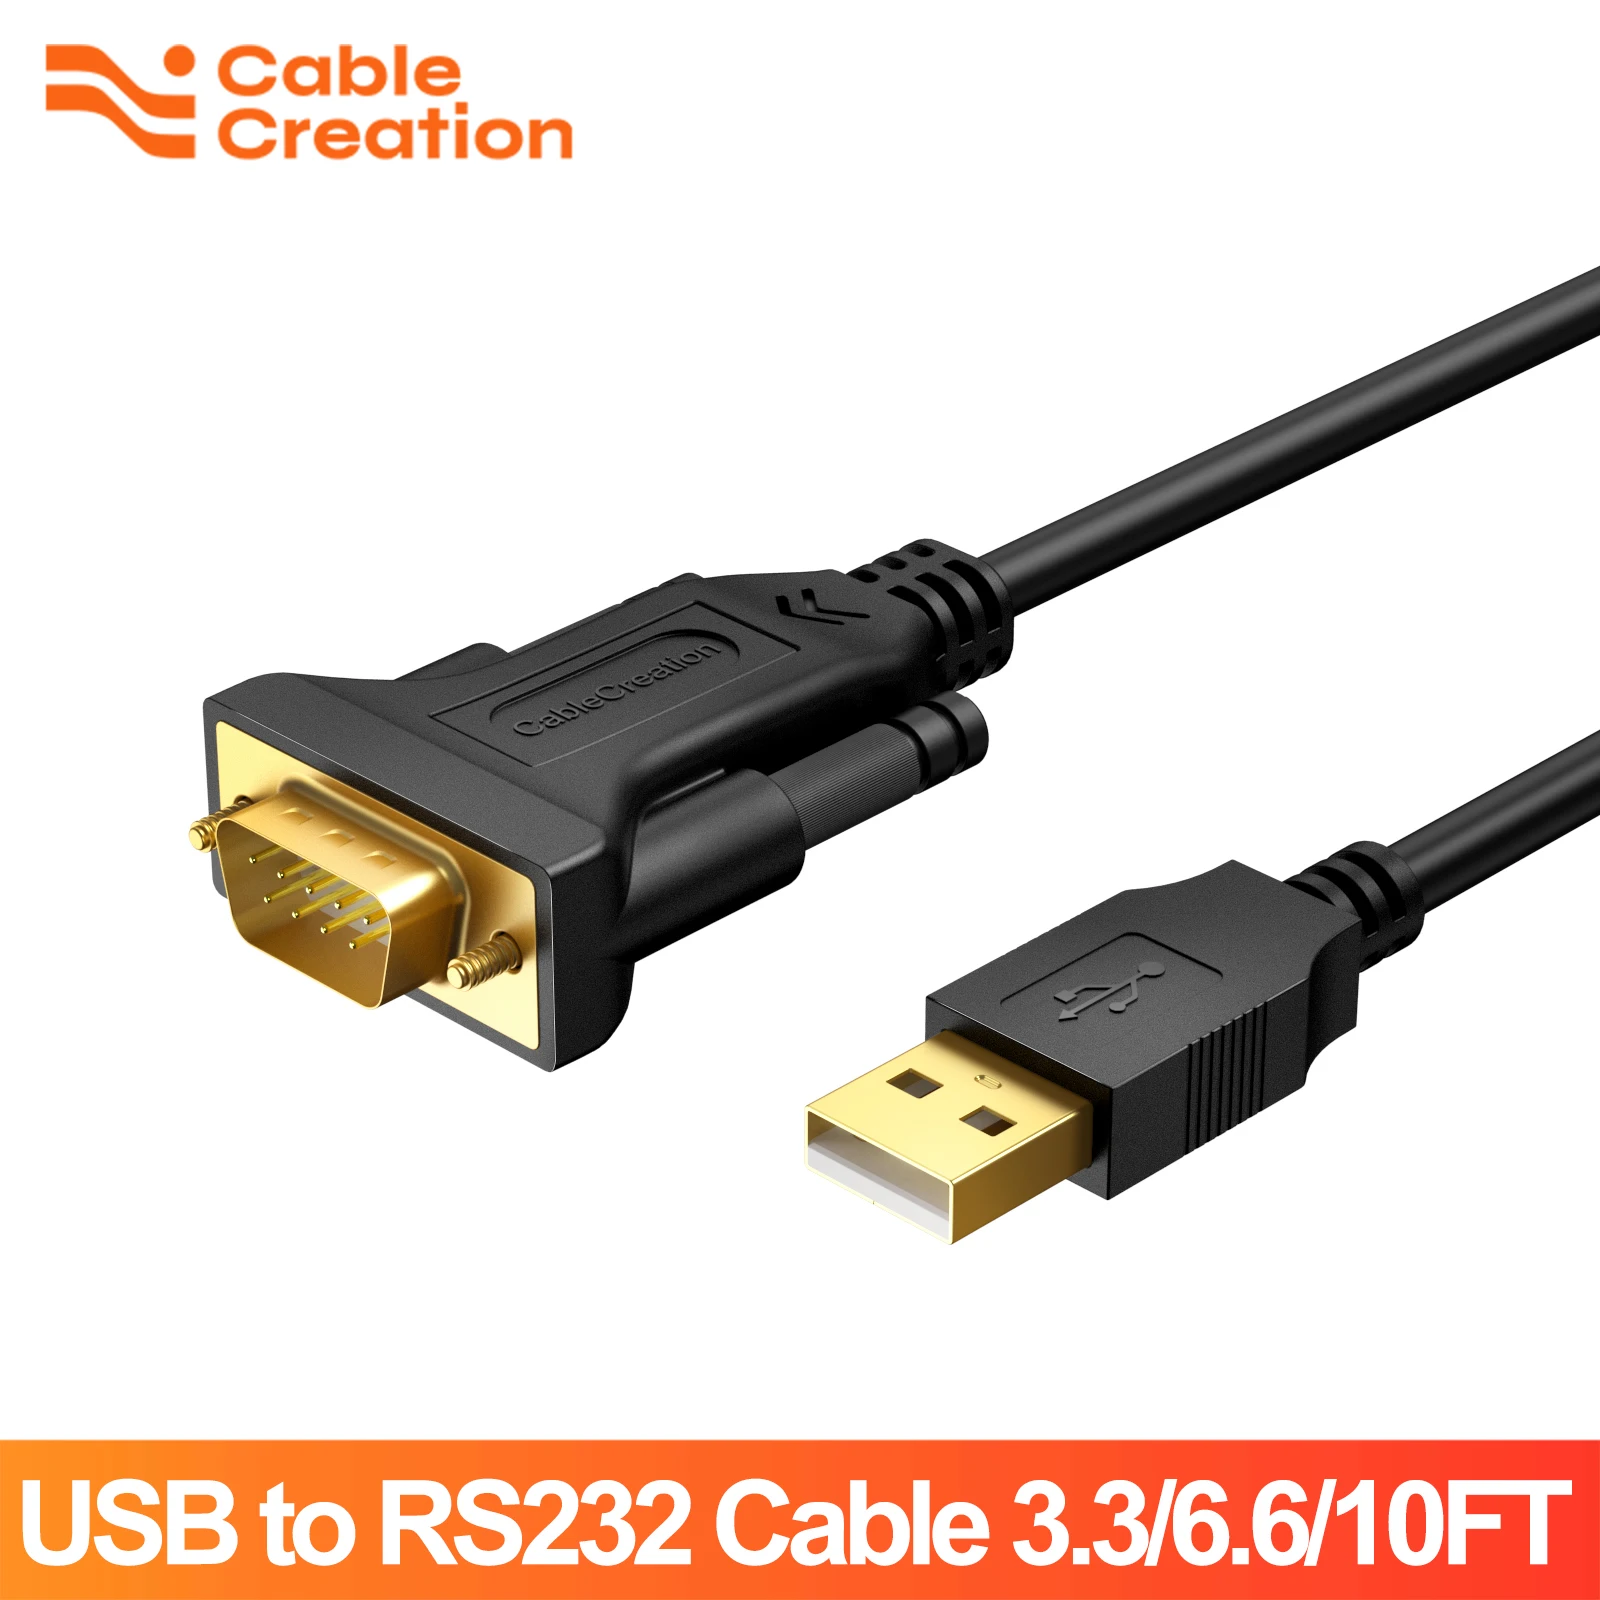 

CableCreation USB to RS232 Male DB9 Cable Serial COM Port Adapter Chip pl2303 Supports Windows 10 8.1 8 7 Vista XP Mac OS